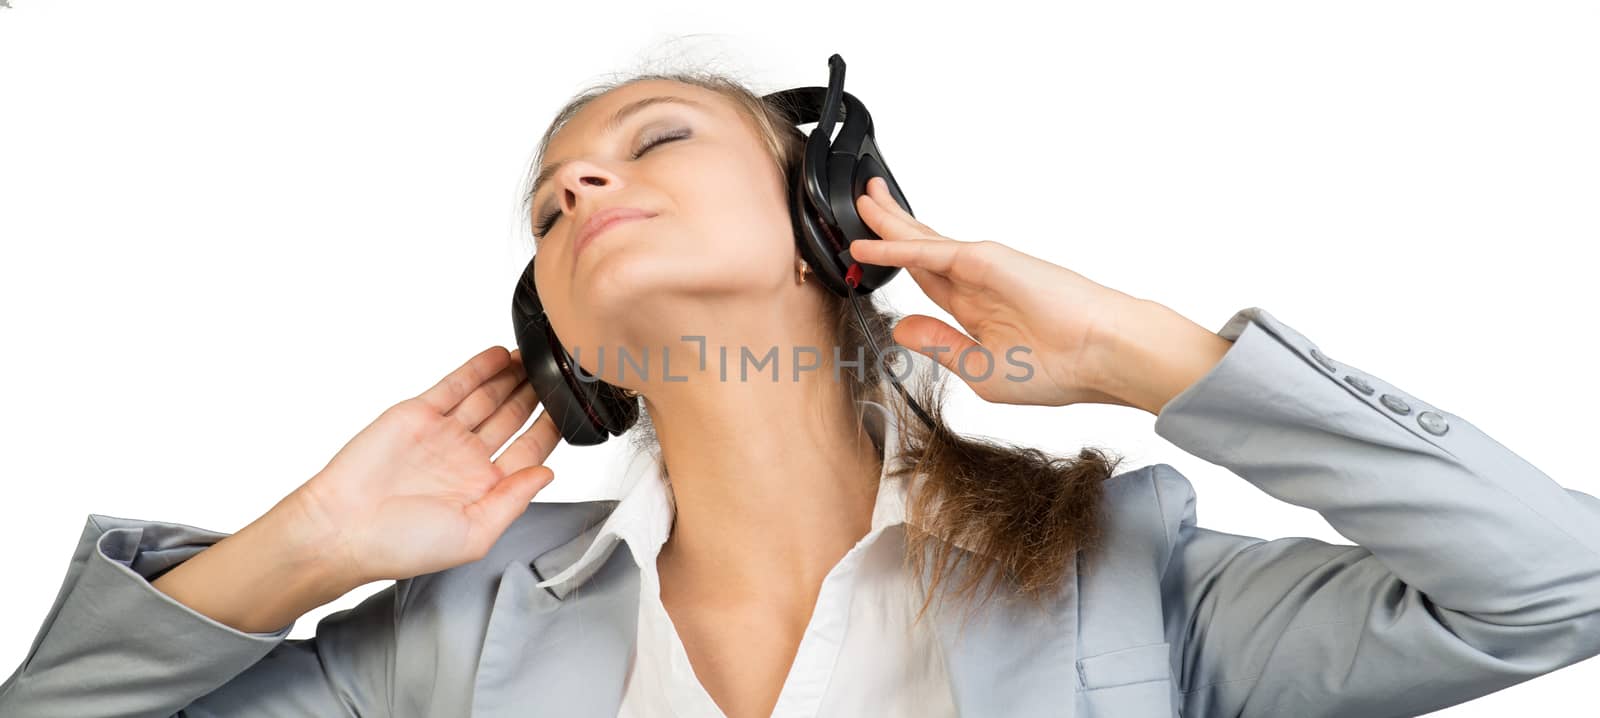 Businesswoman in headset sitting on chair with her hands on headset speakers, her head tilted sideways, eyes closed. Isolated over white background